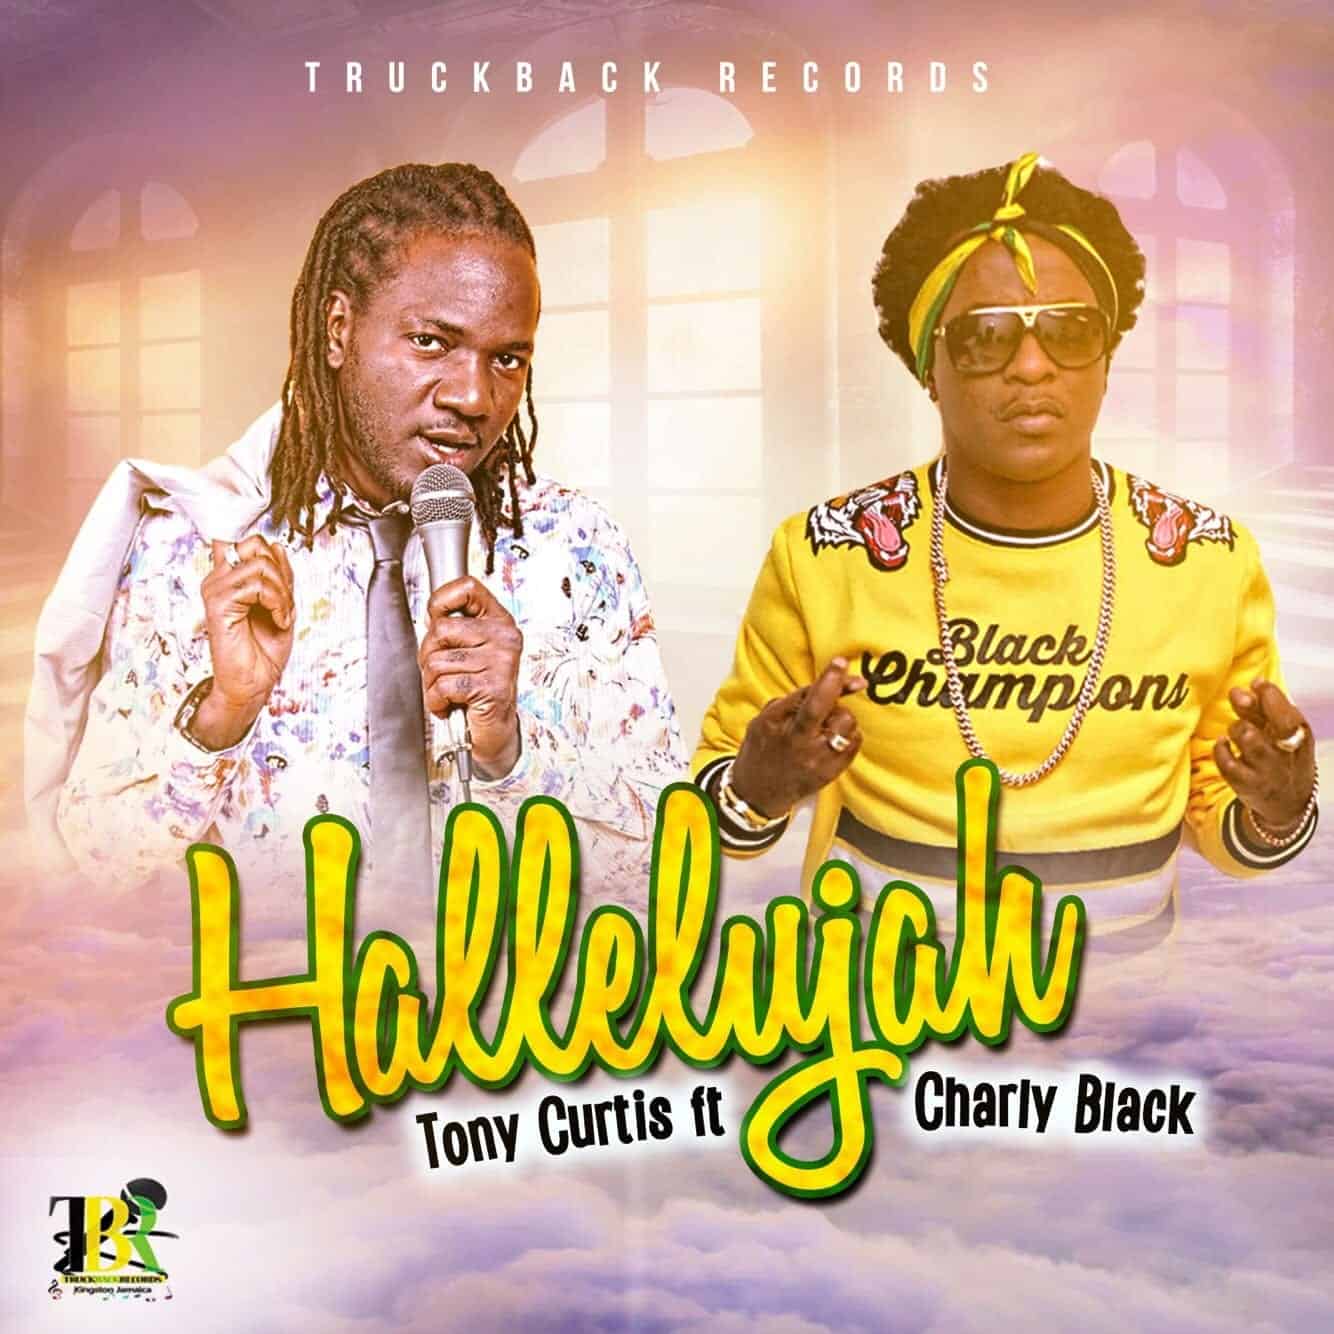 Tony Curtis and Charly Black - Hallelujah - Truckback Records